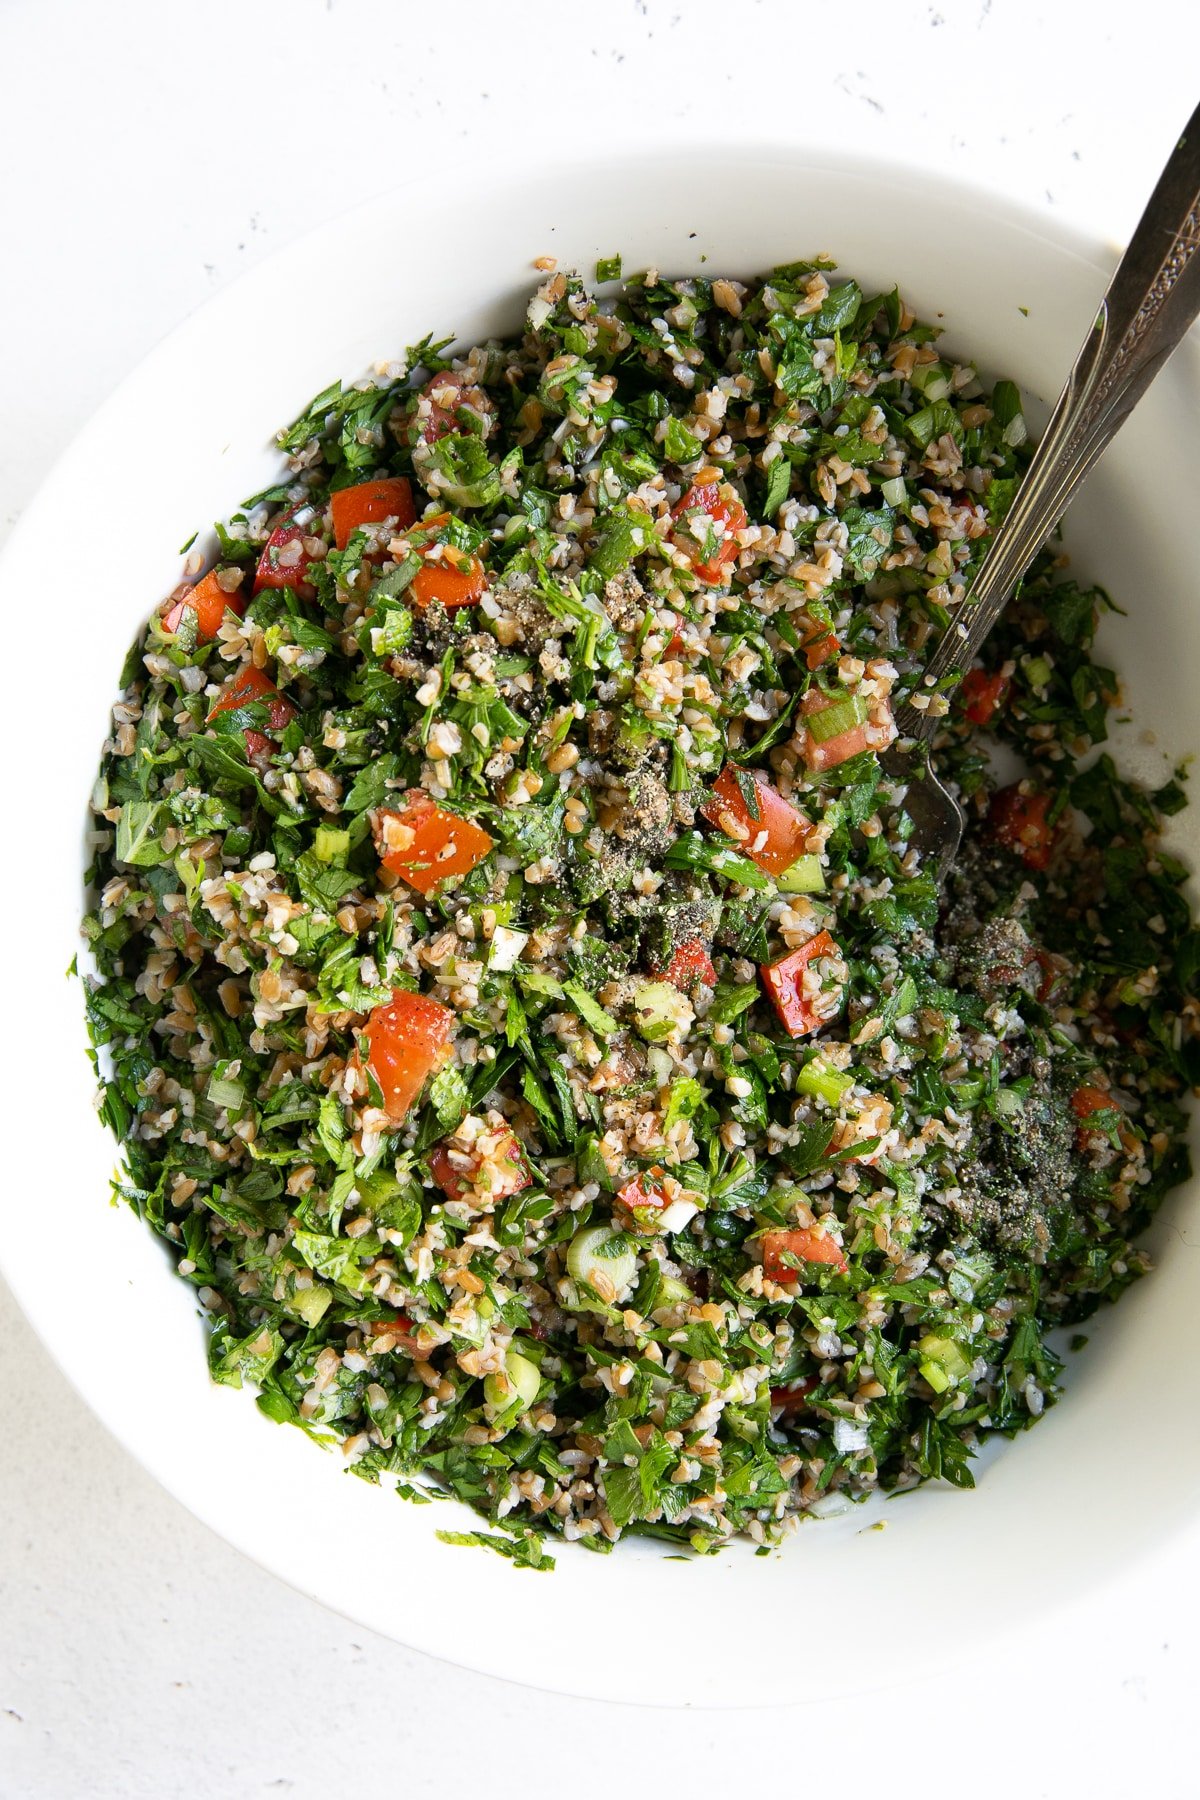 White bowl filled with prepared Tabbouleh salad.